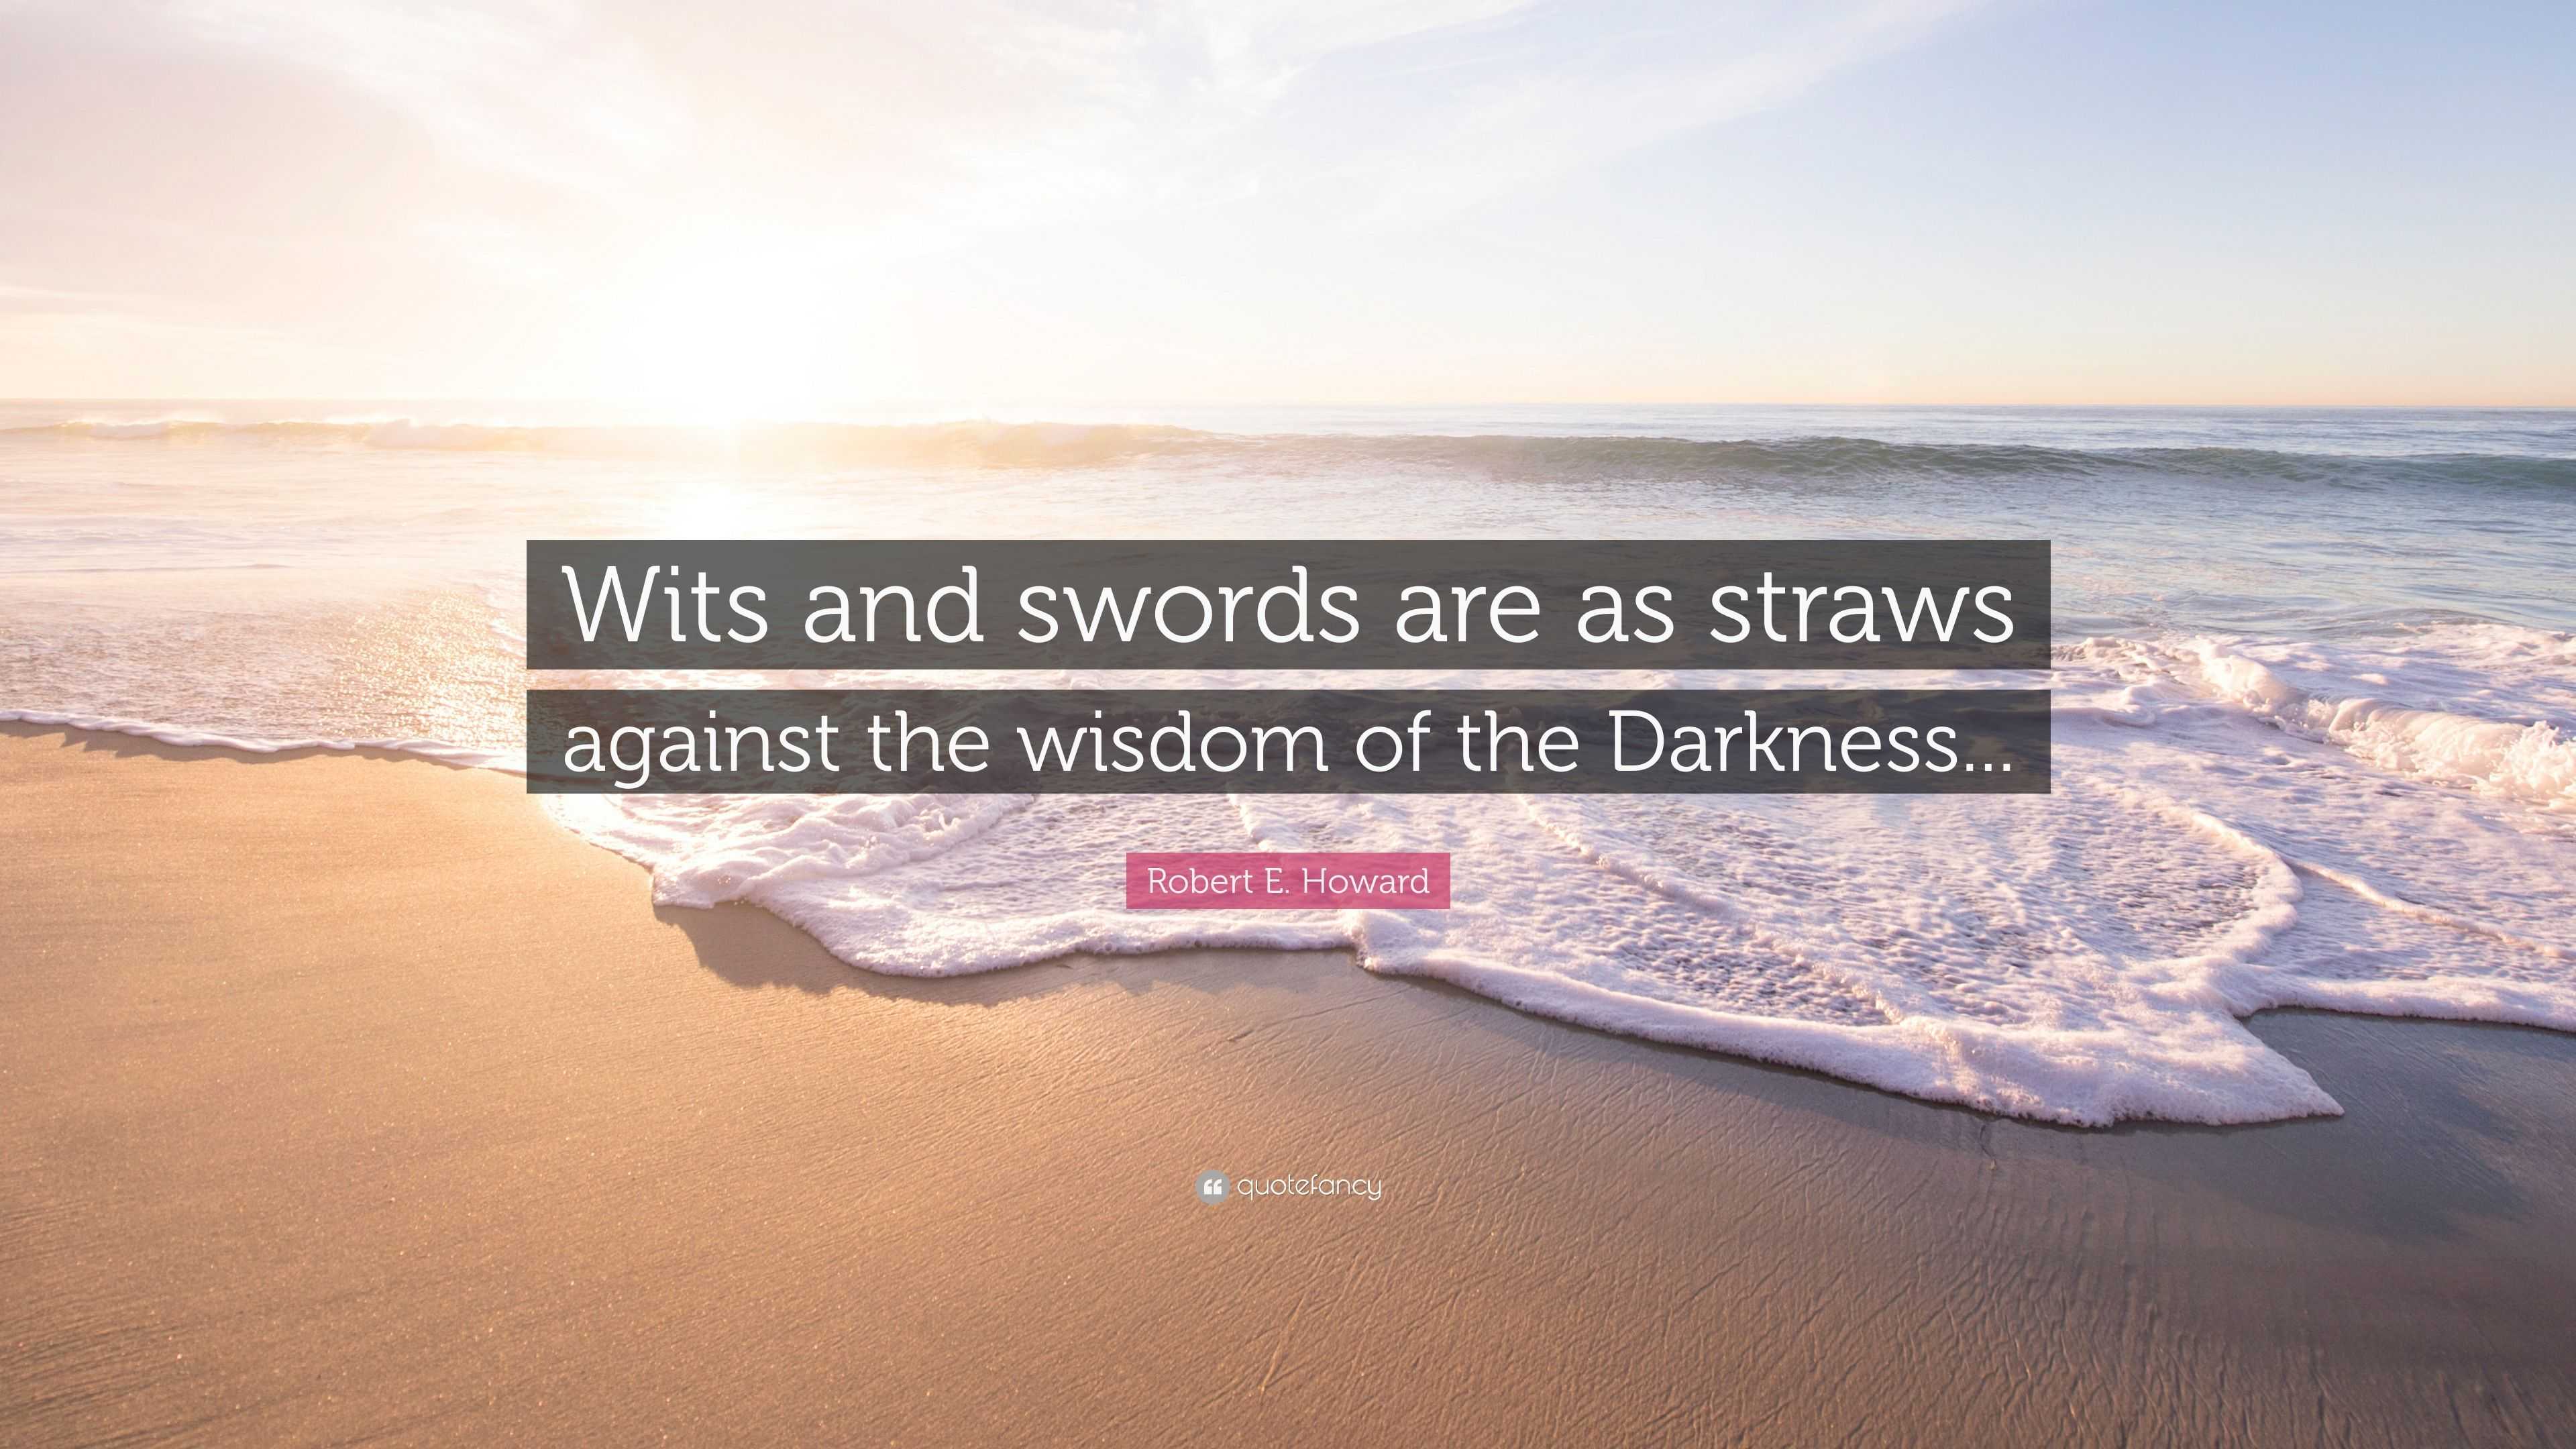 Robert E Howard Quote Wits And Swords Are As Straws Against The Wisdom Of The Darkness